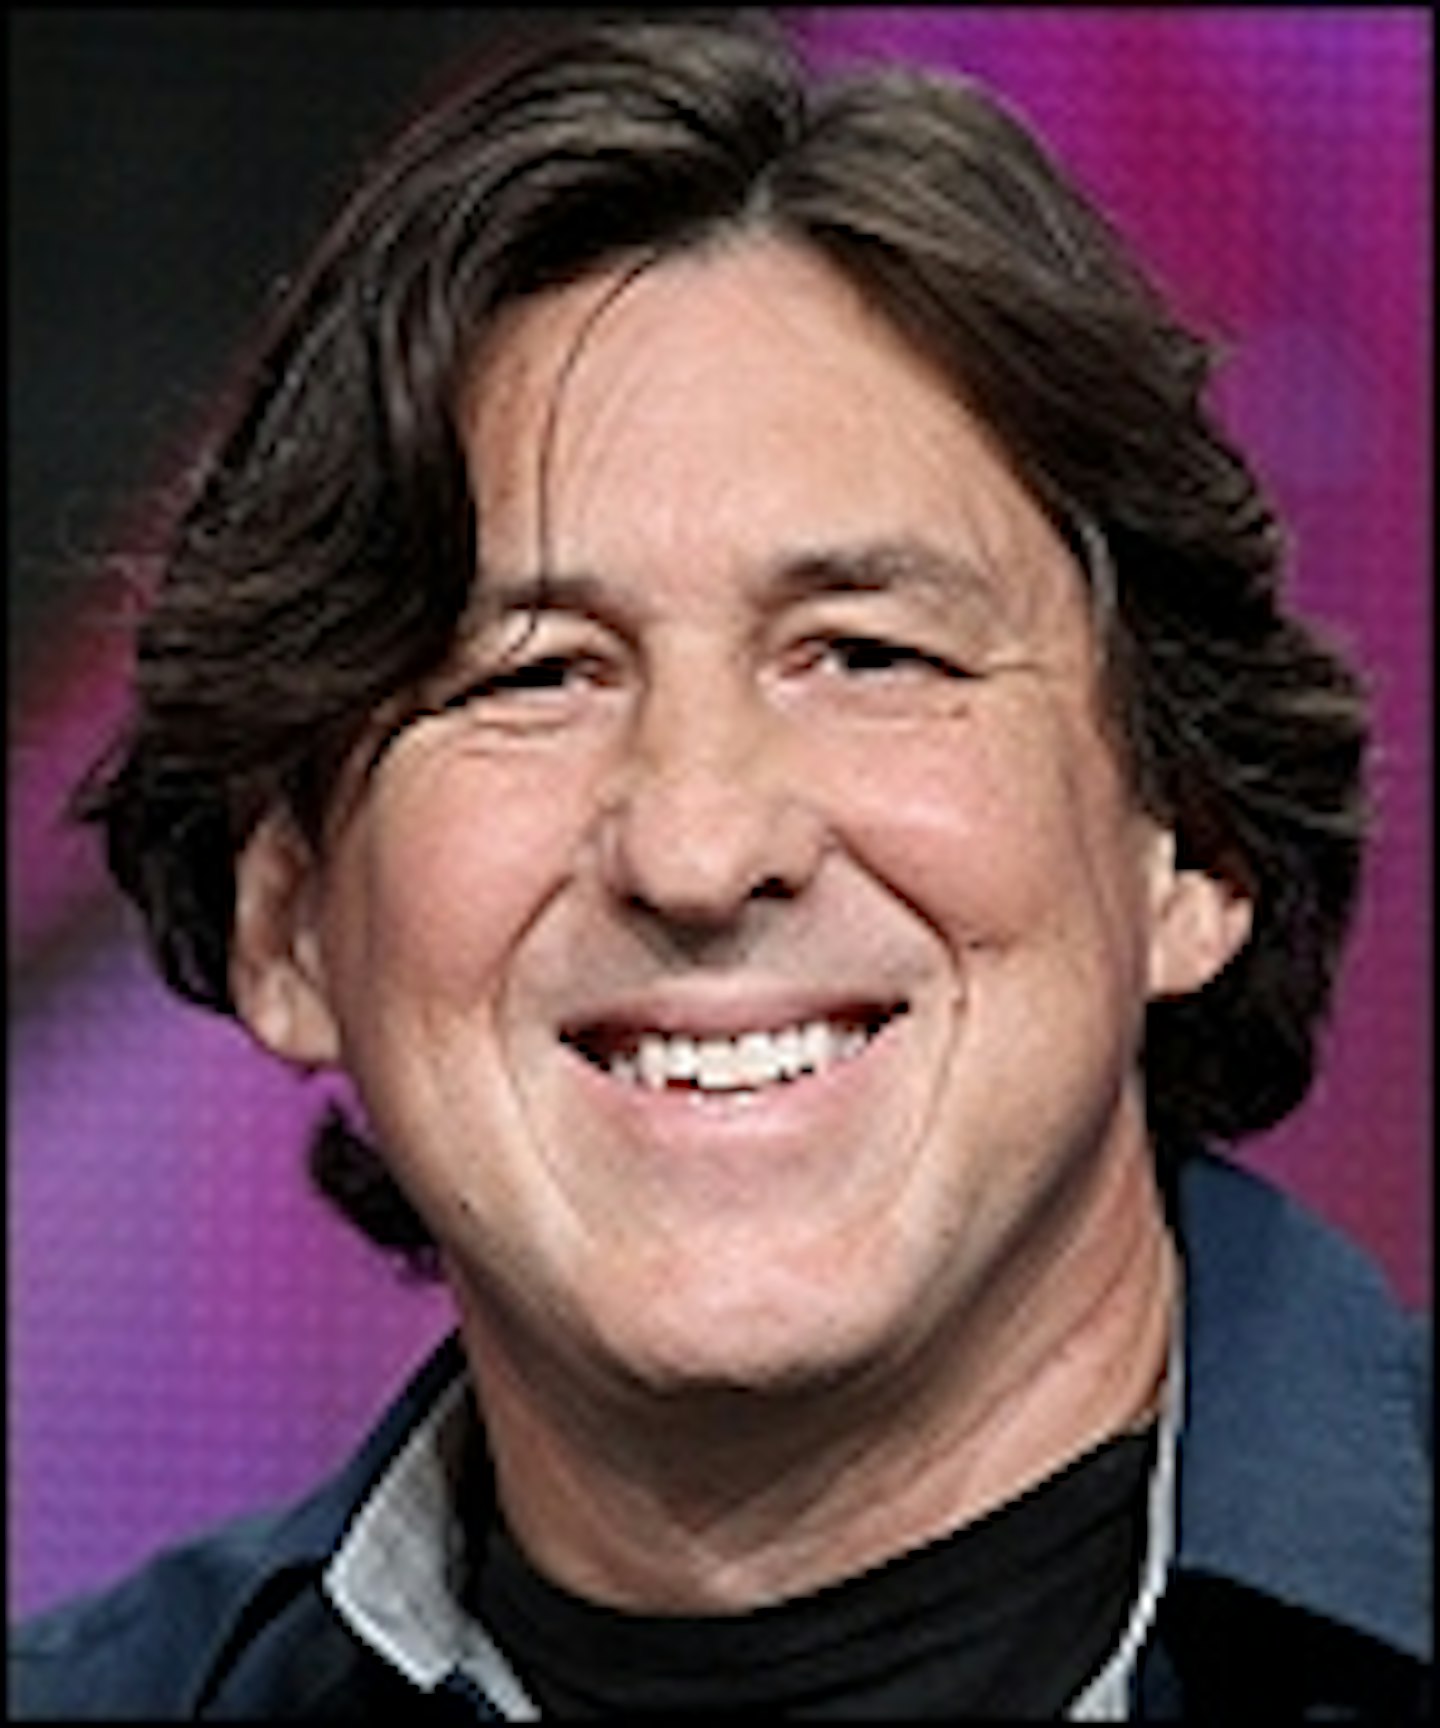 Cameron Crowe's New Film Moved To May 2015